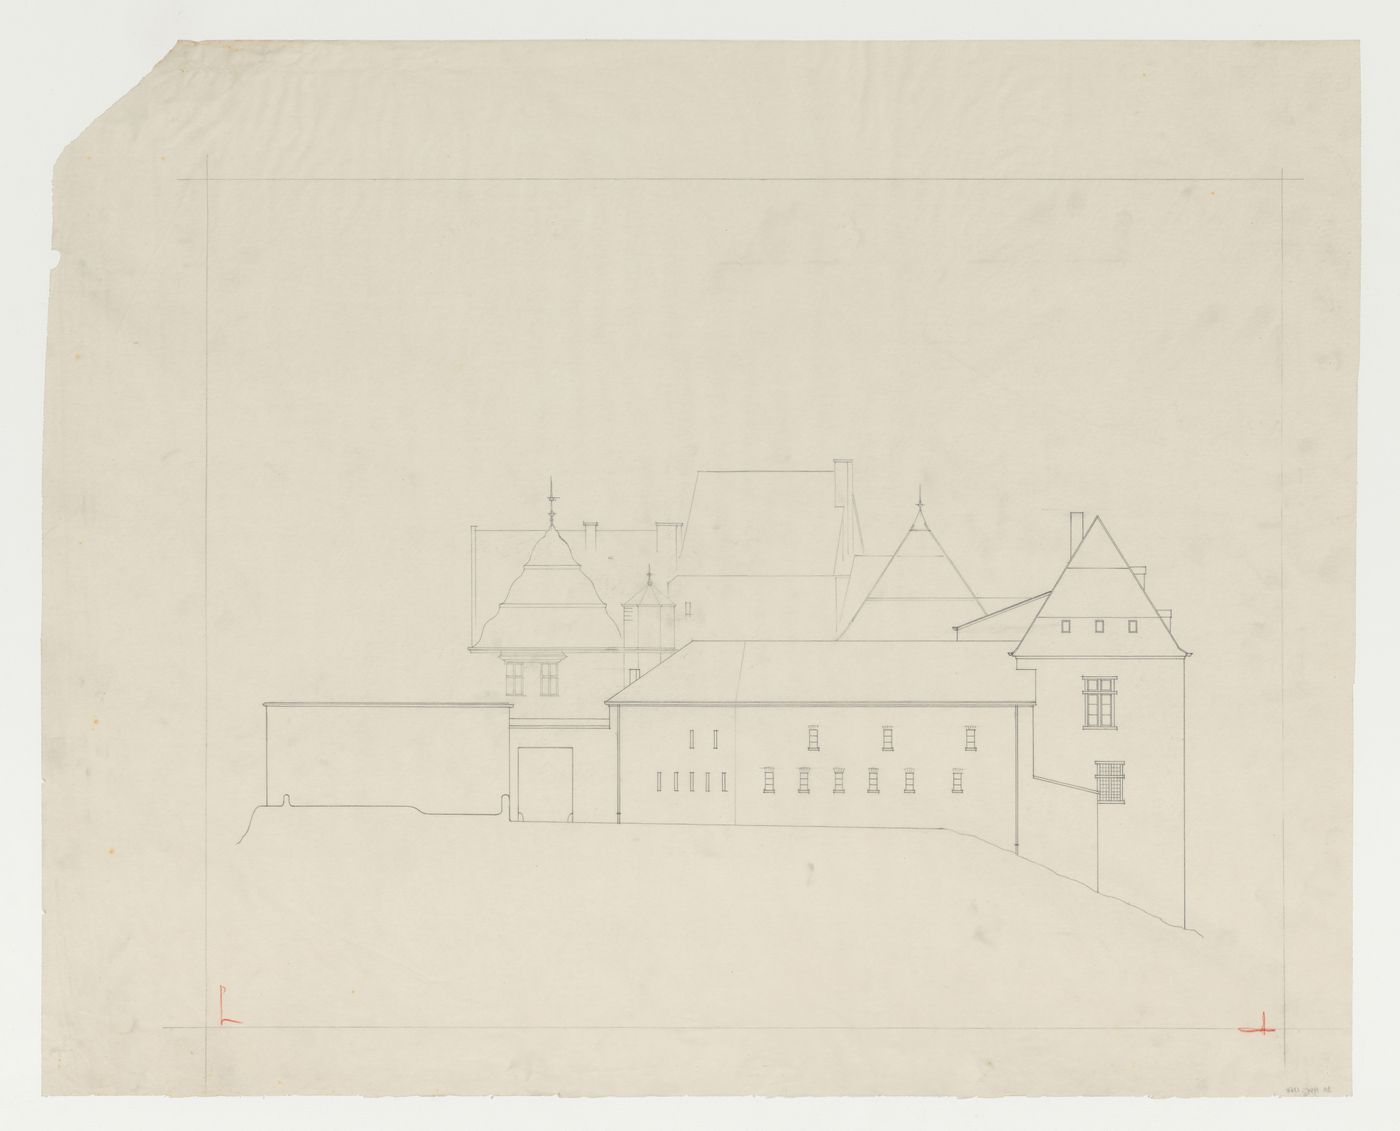 Elevation for an addition to an existing building, possibly a school, Limburg an der Lahn, Germany